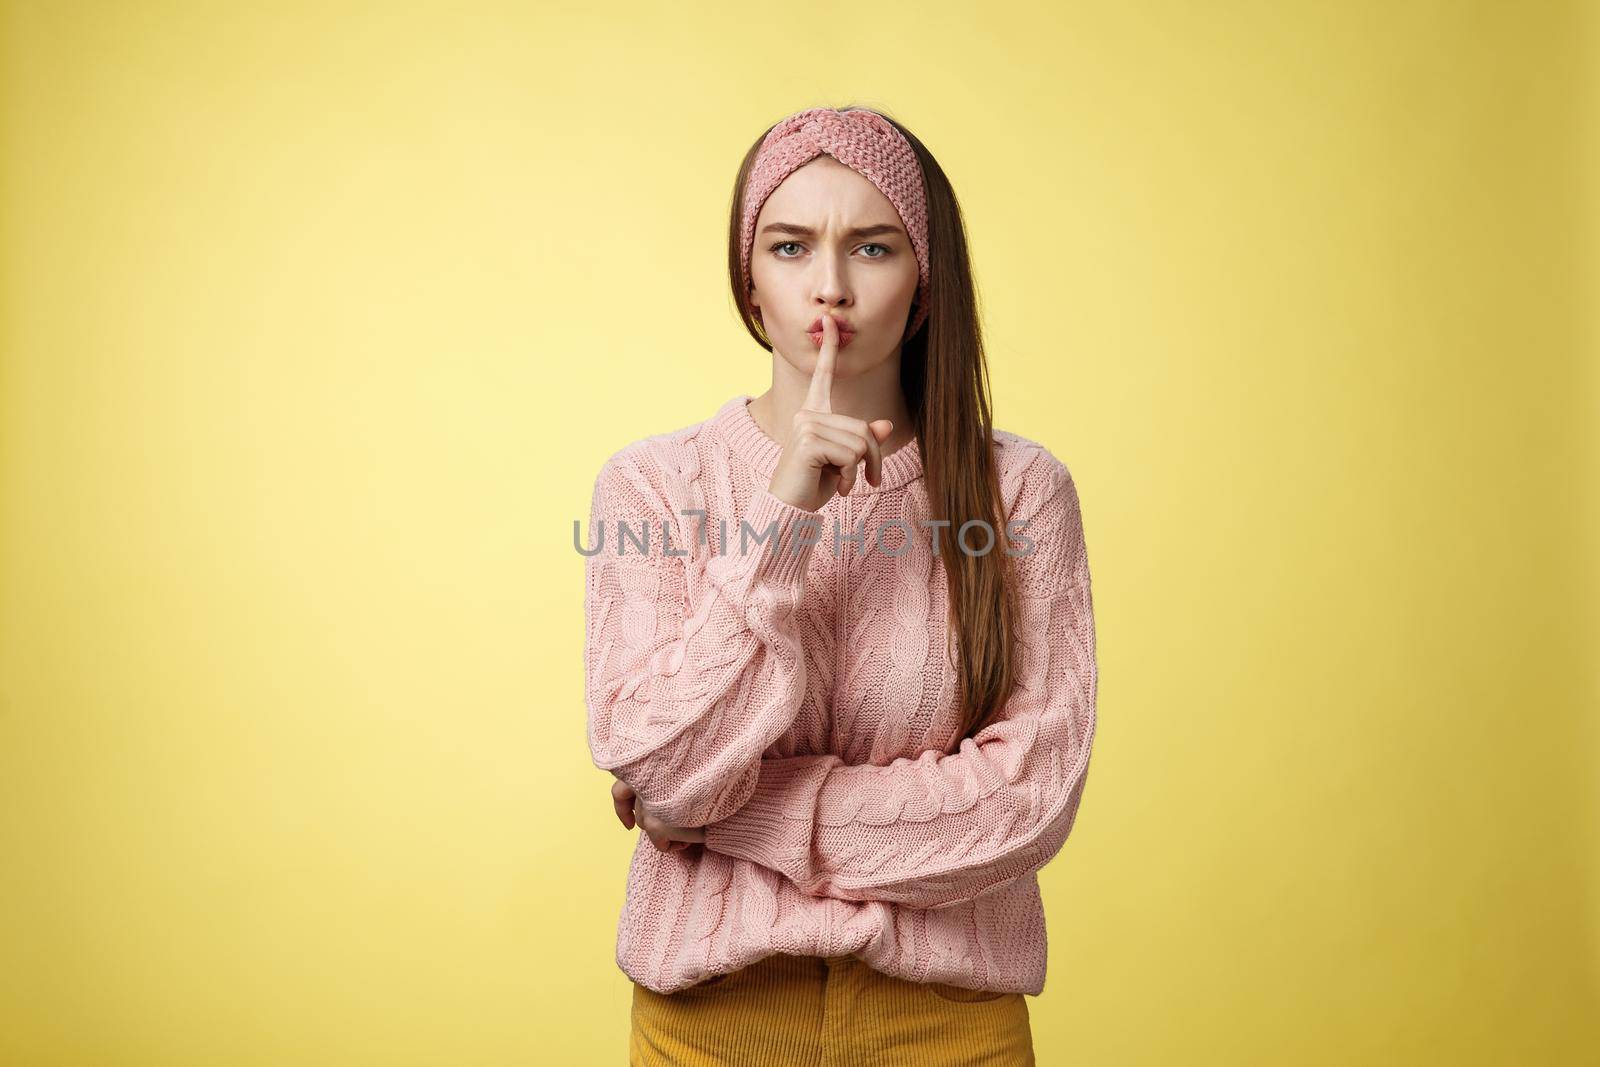 Keep mouth shut. Serious-looking bossy attractive young 20s woman in sweater, headband shushing making shhh gesture holding index finger on lips, gossiping, spread rumors over yellow background.